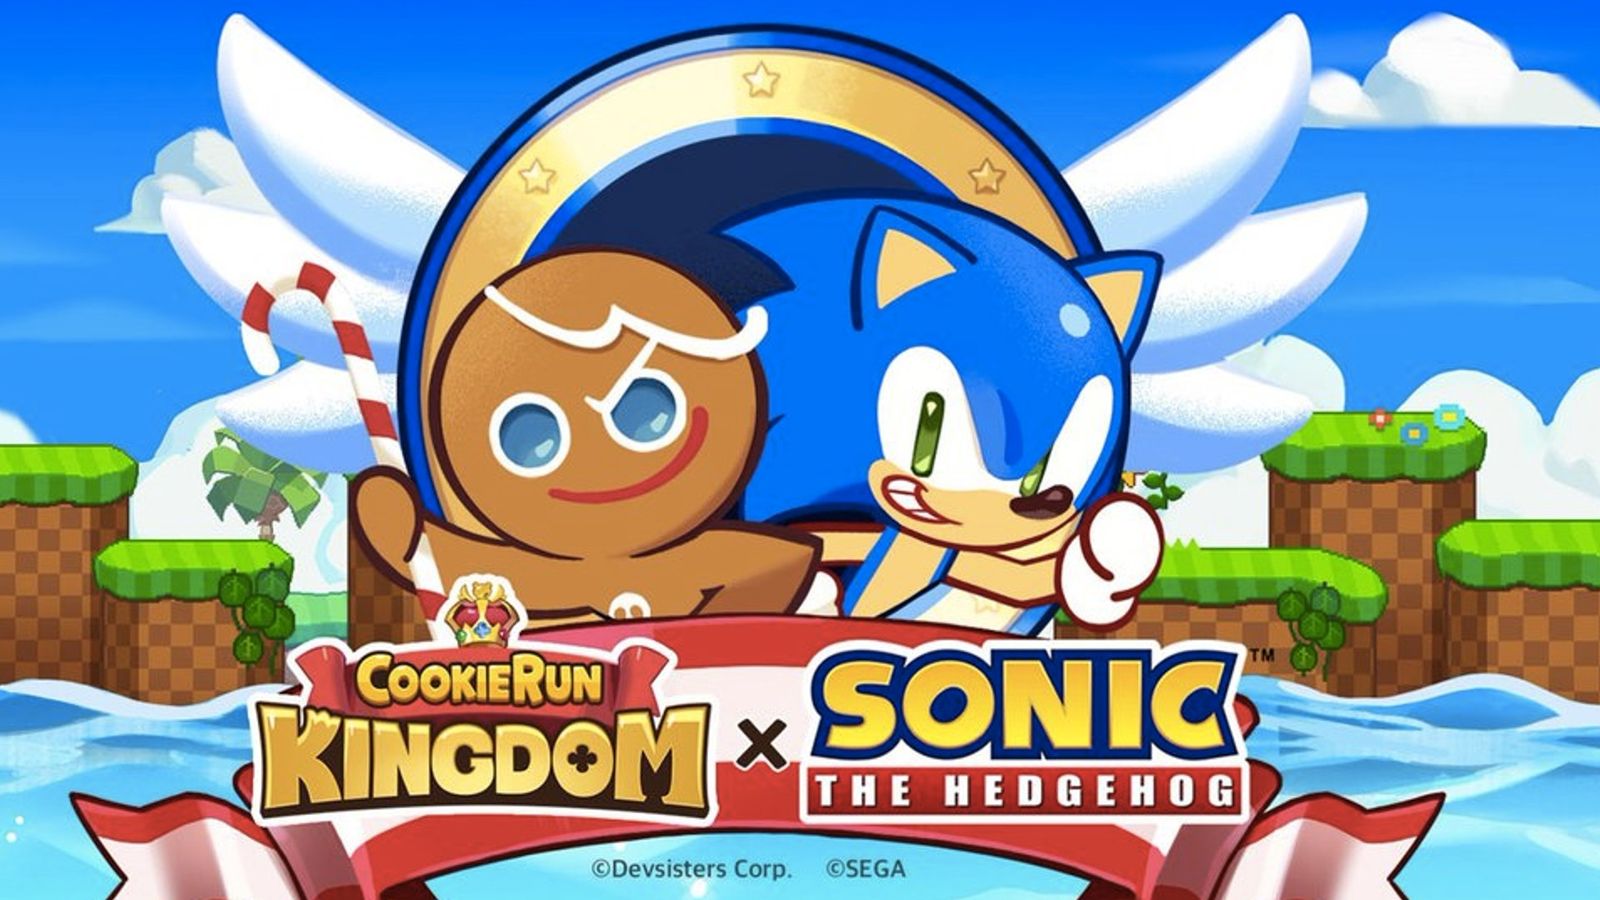 Promotional image from the Cookie Run: Kingdom and Sonic the Hedgehog crossover